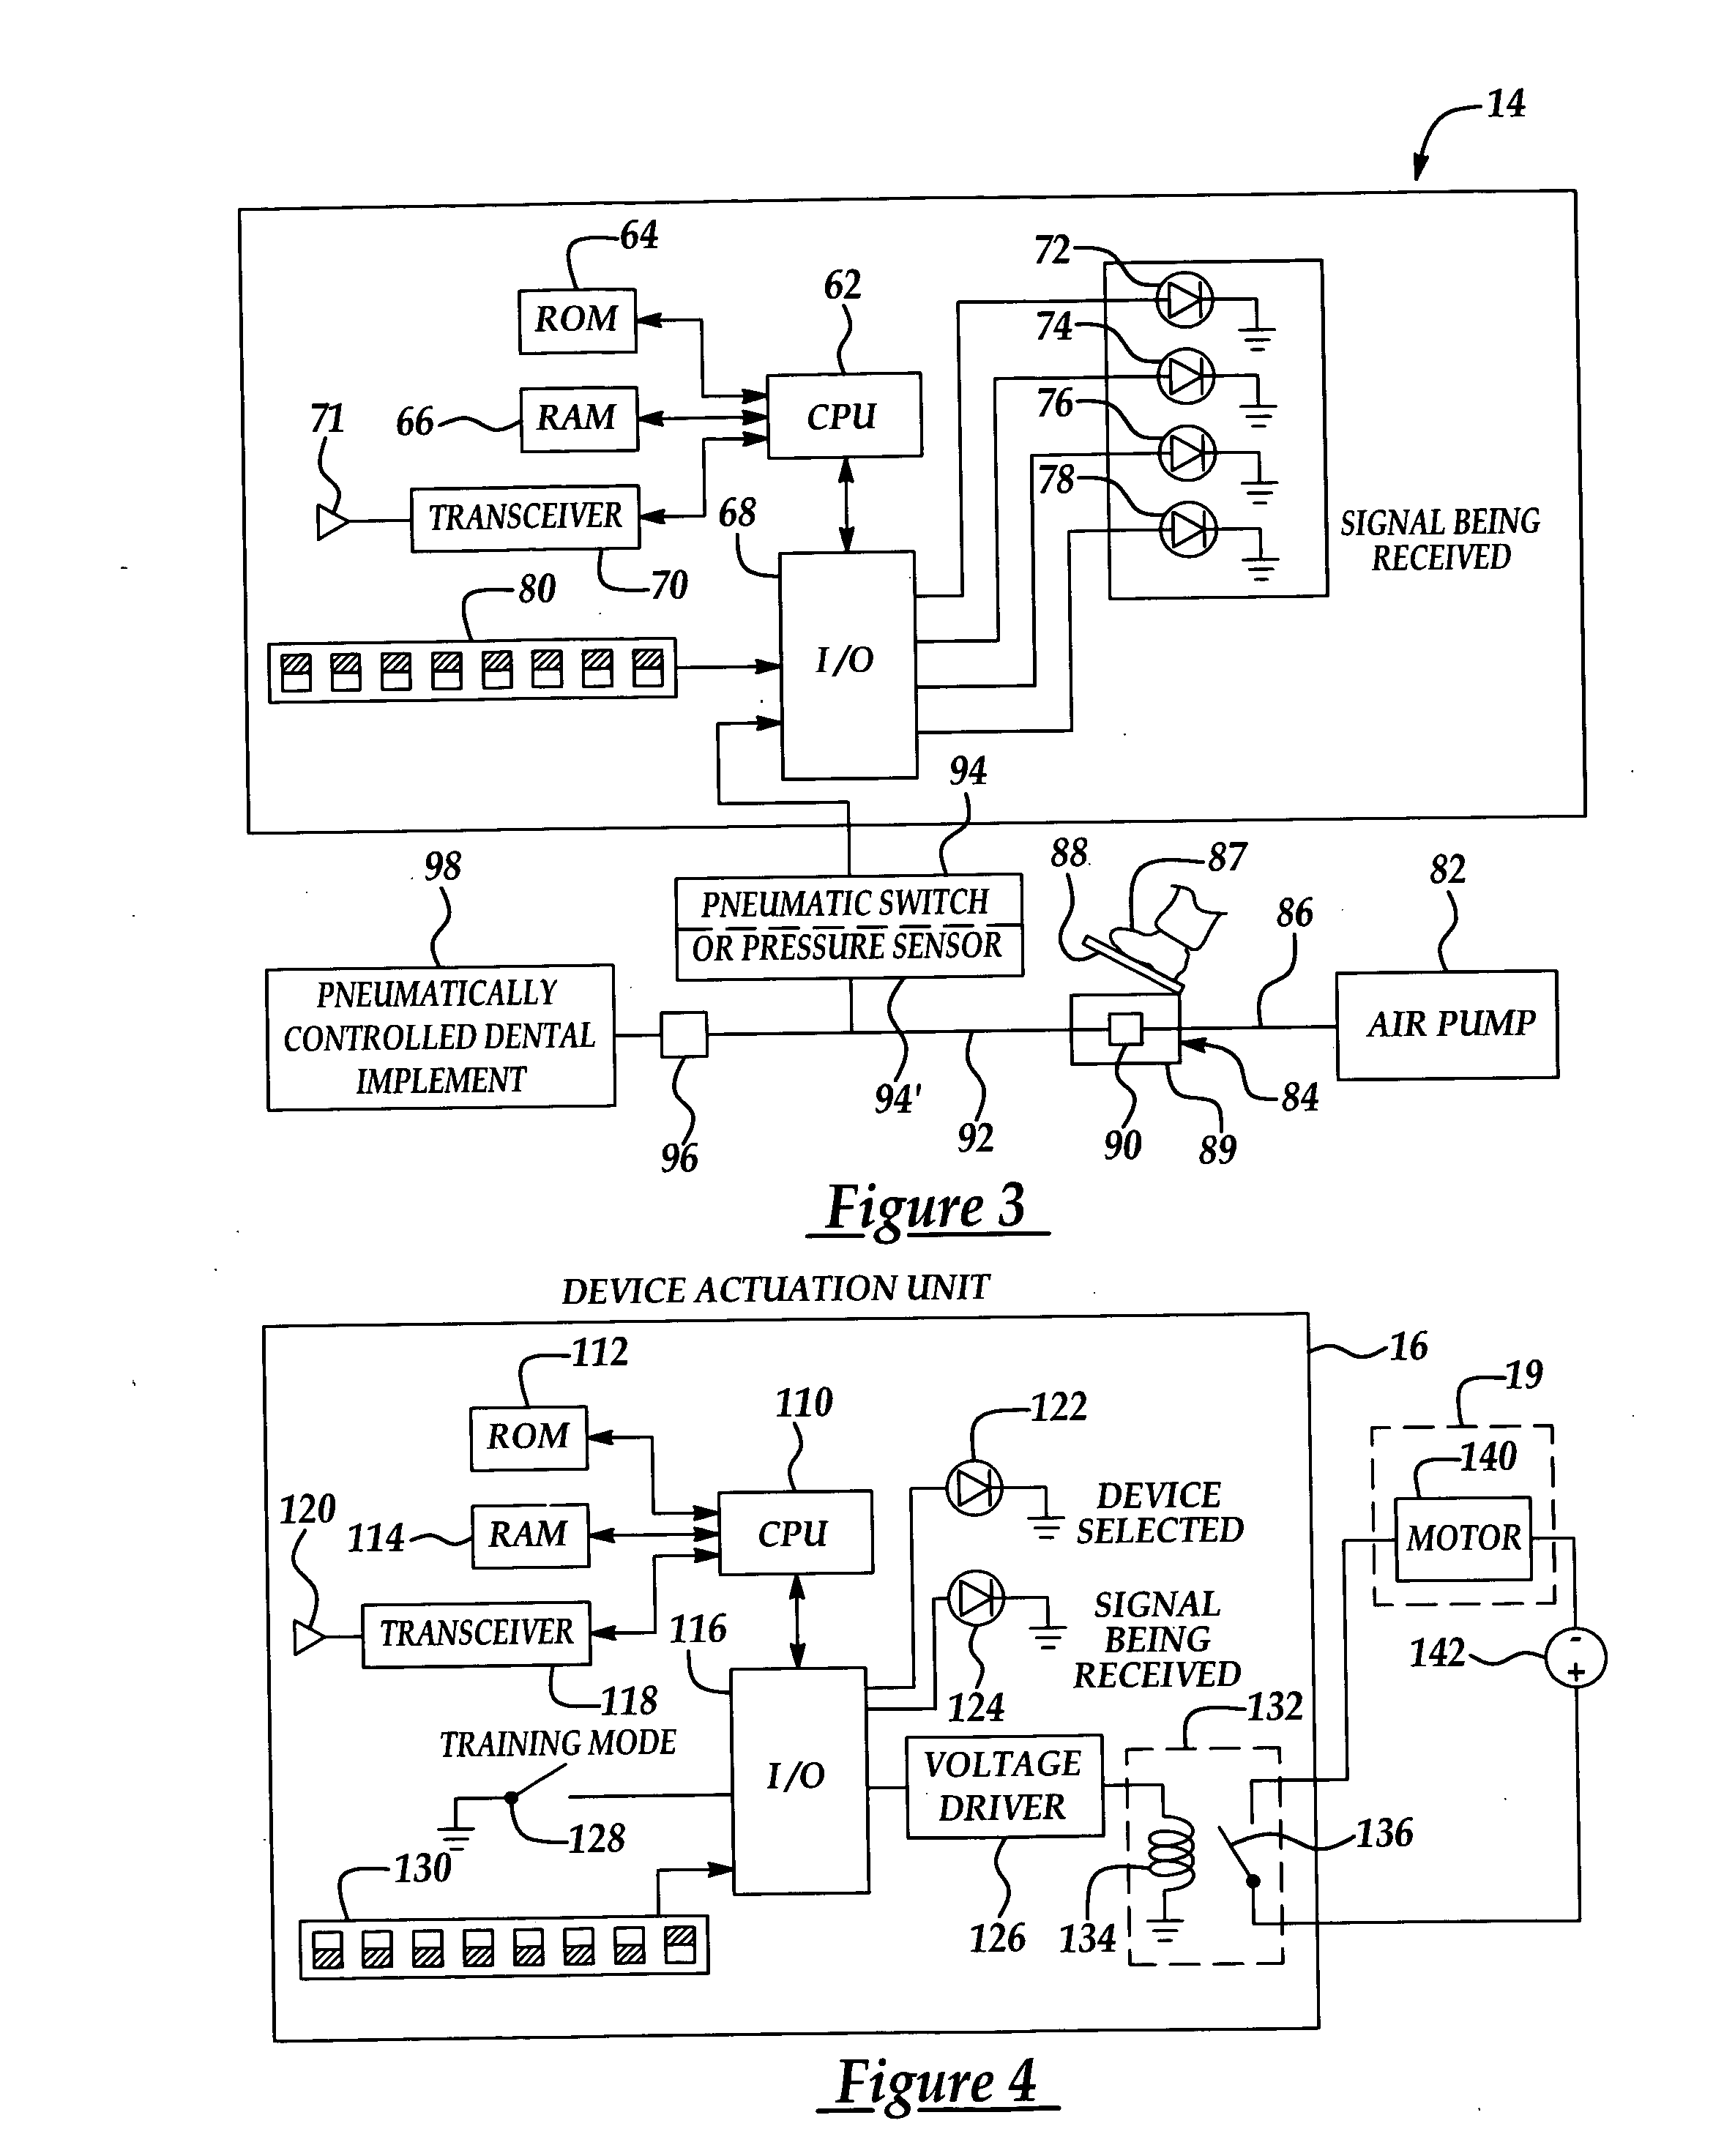 System and method for remotely controlling devices